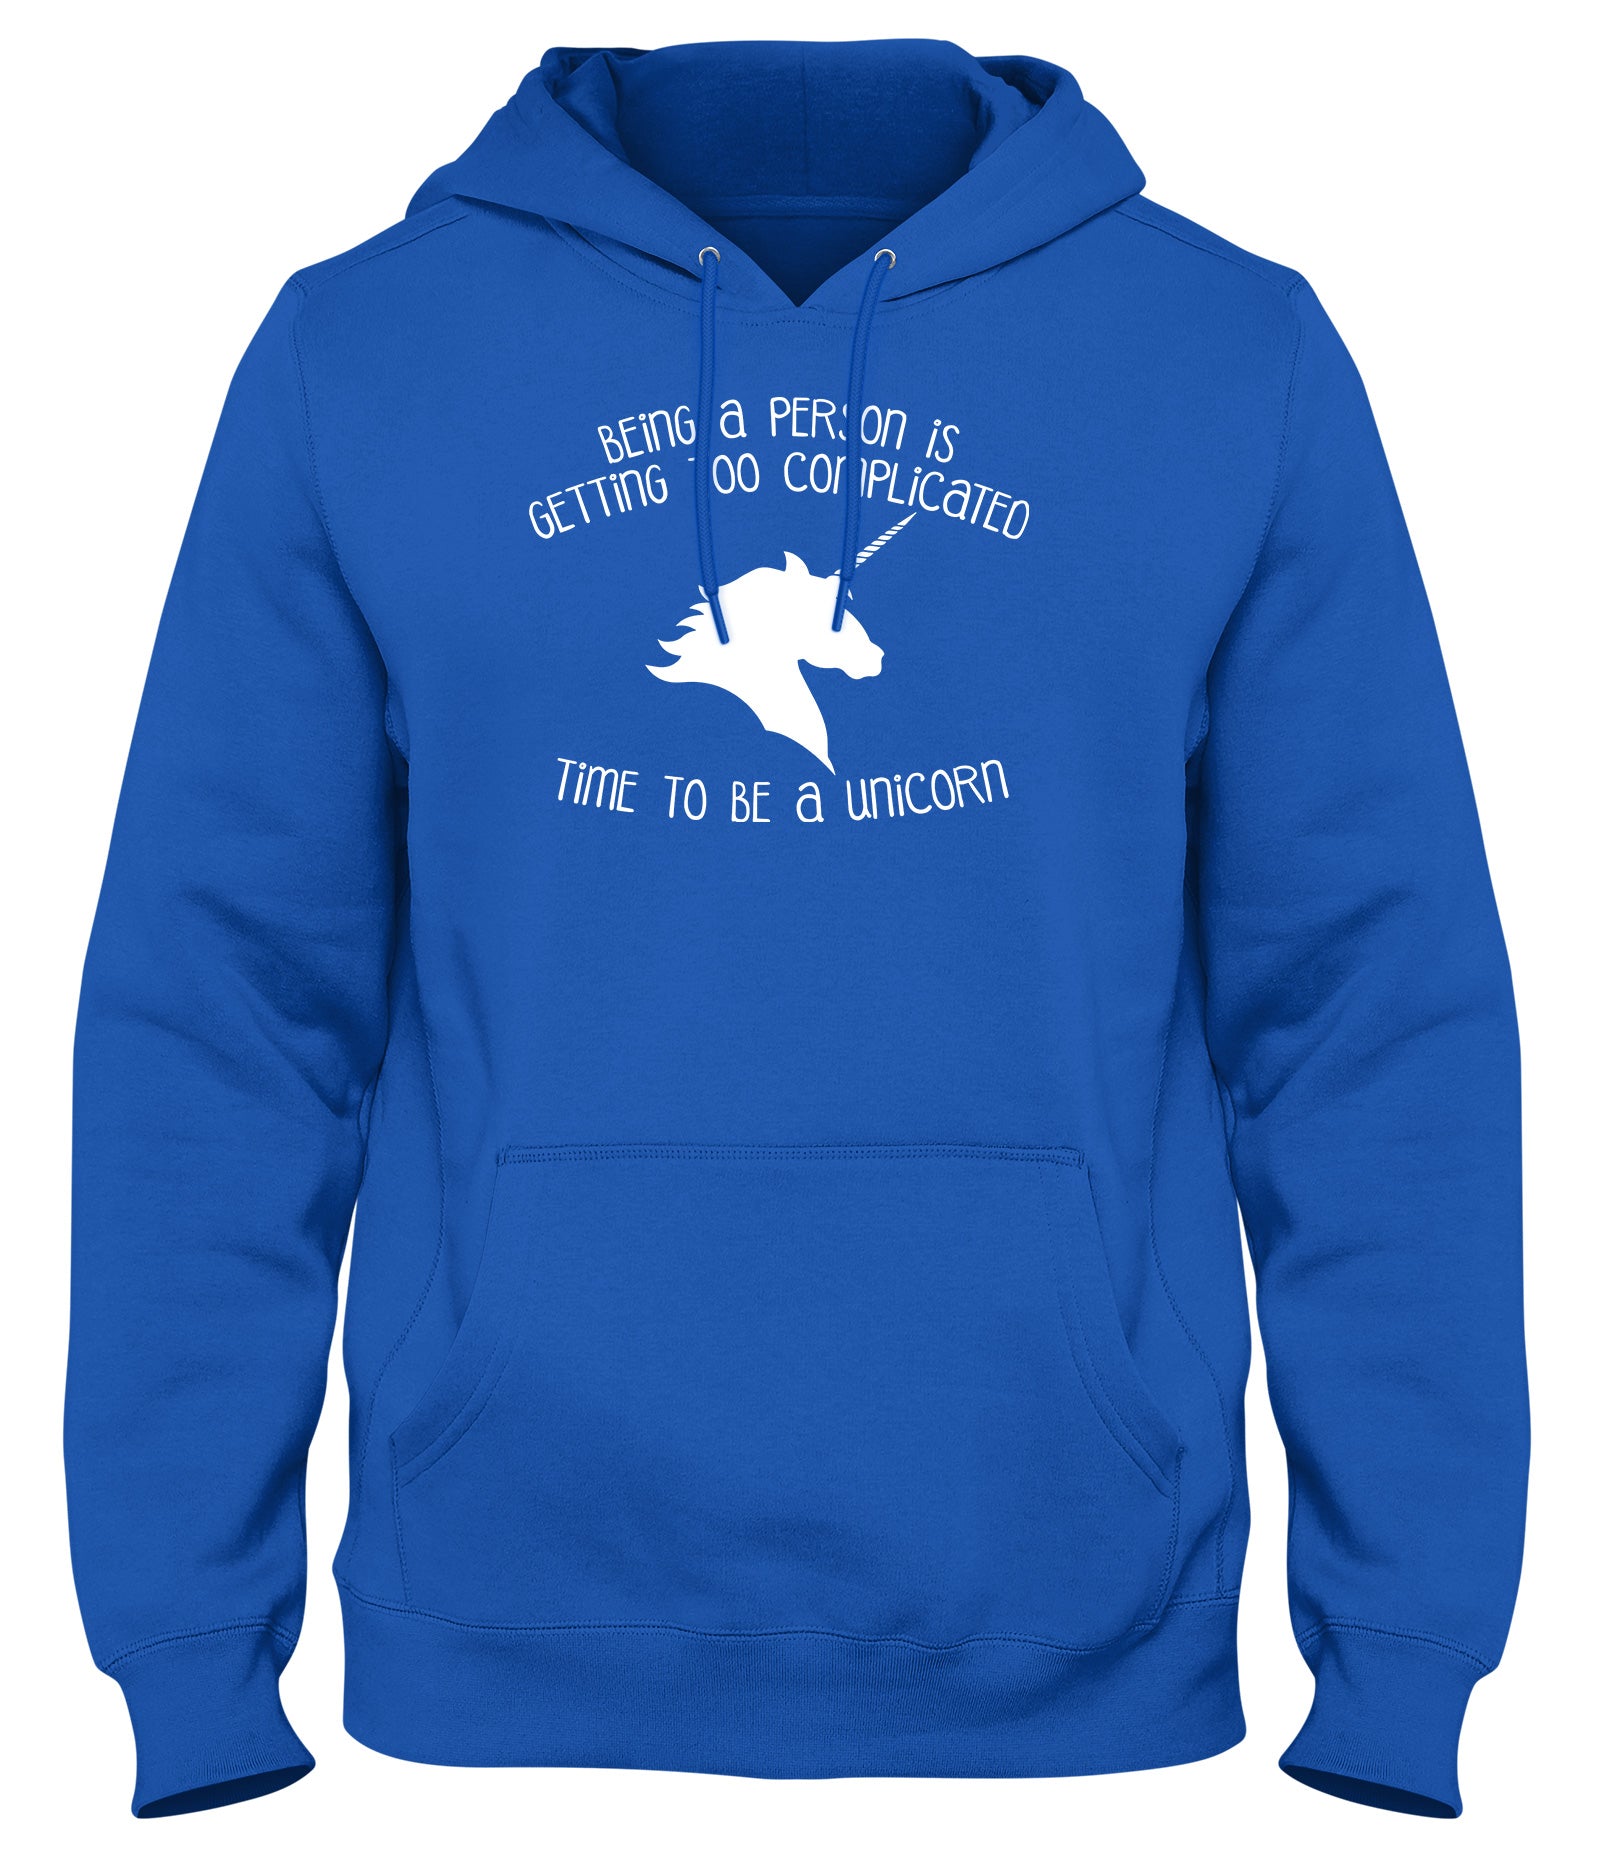 BEING A PERSON IS GETTING TOO COMPLICATED  TIME TO BE A UNICORN MENS LADIES WOMENS UNISEX HOODIE